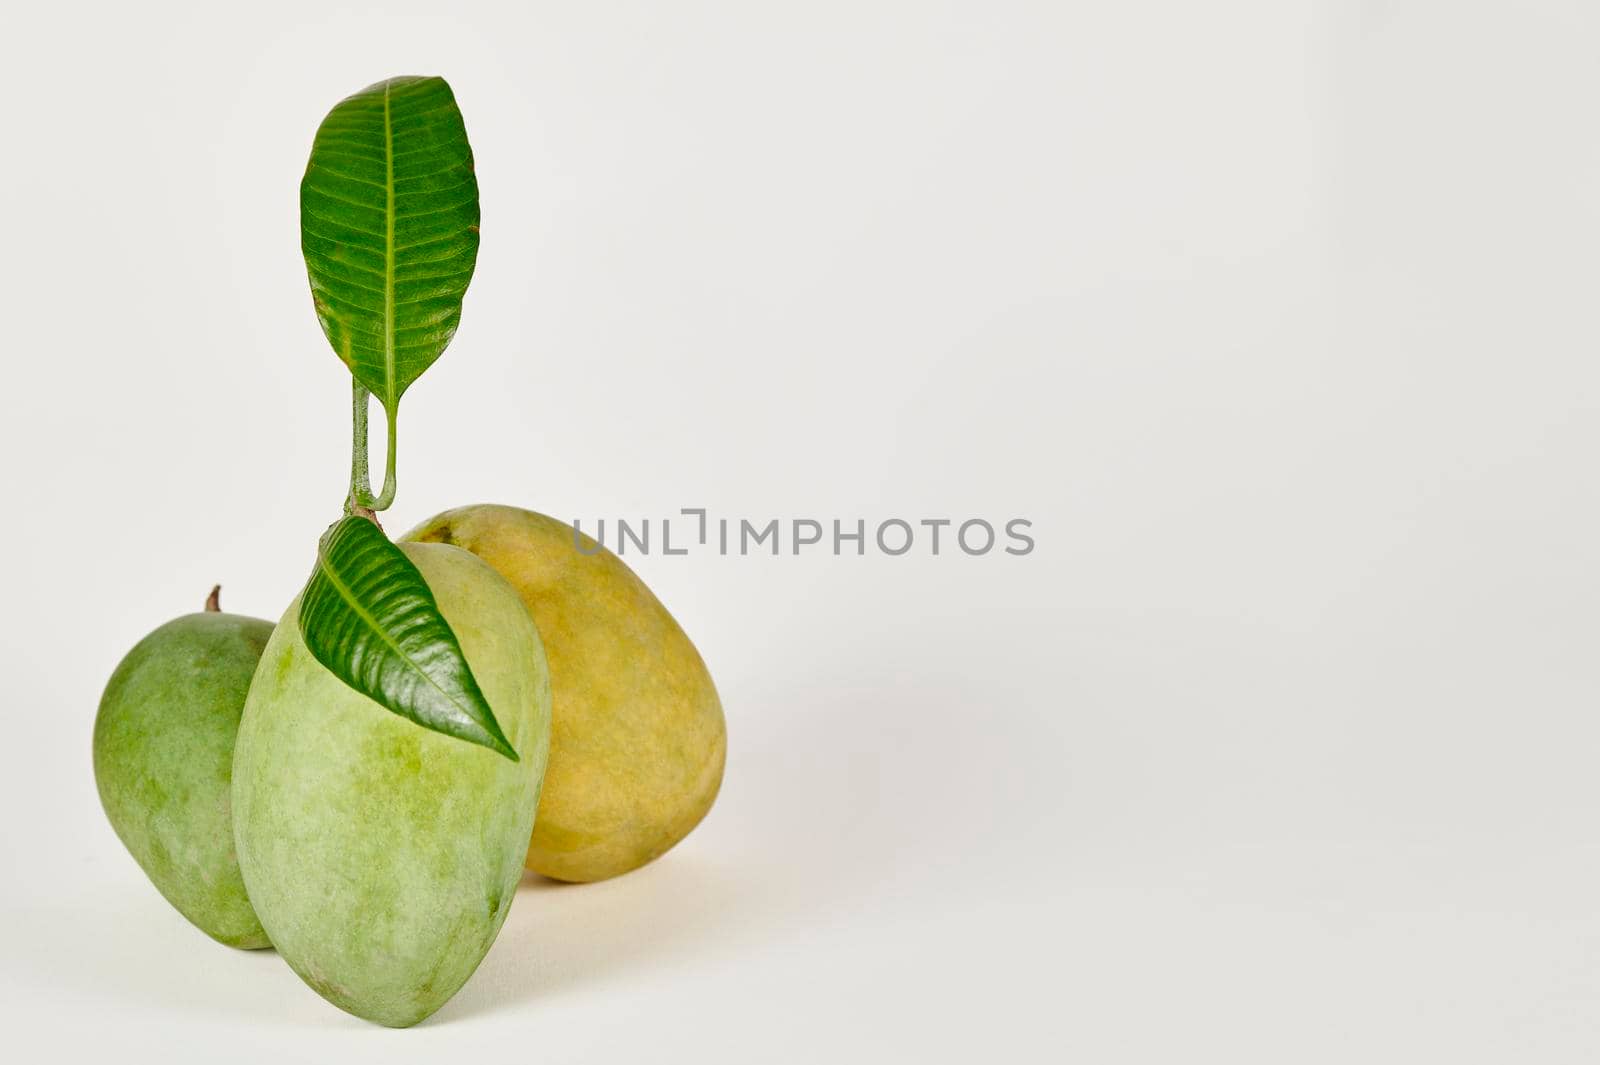 Three Chausa mangoes on a white background